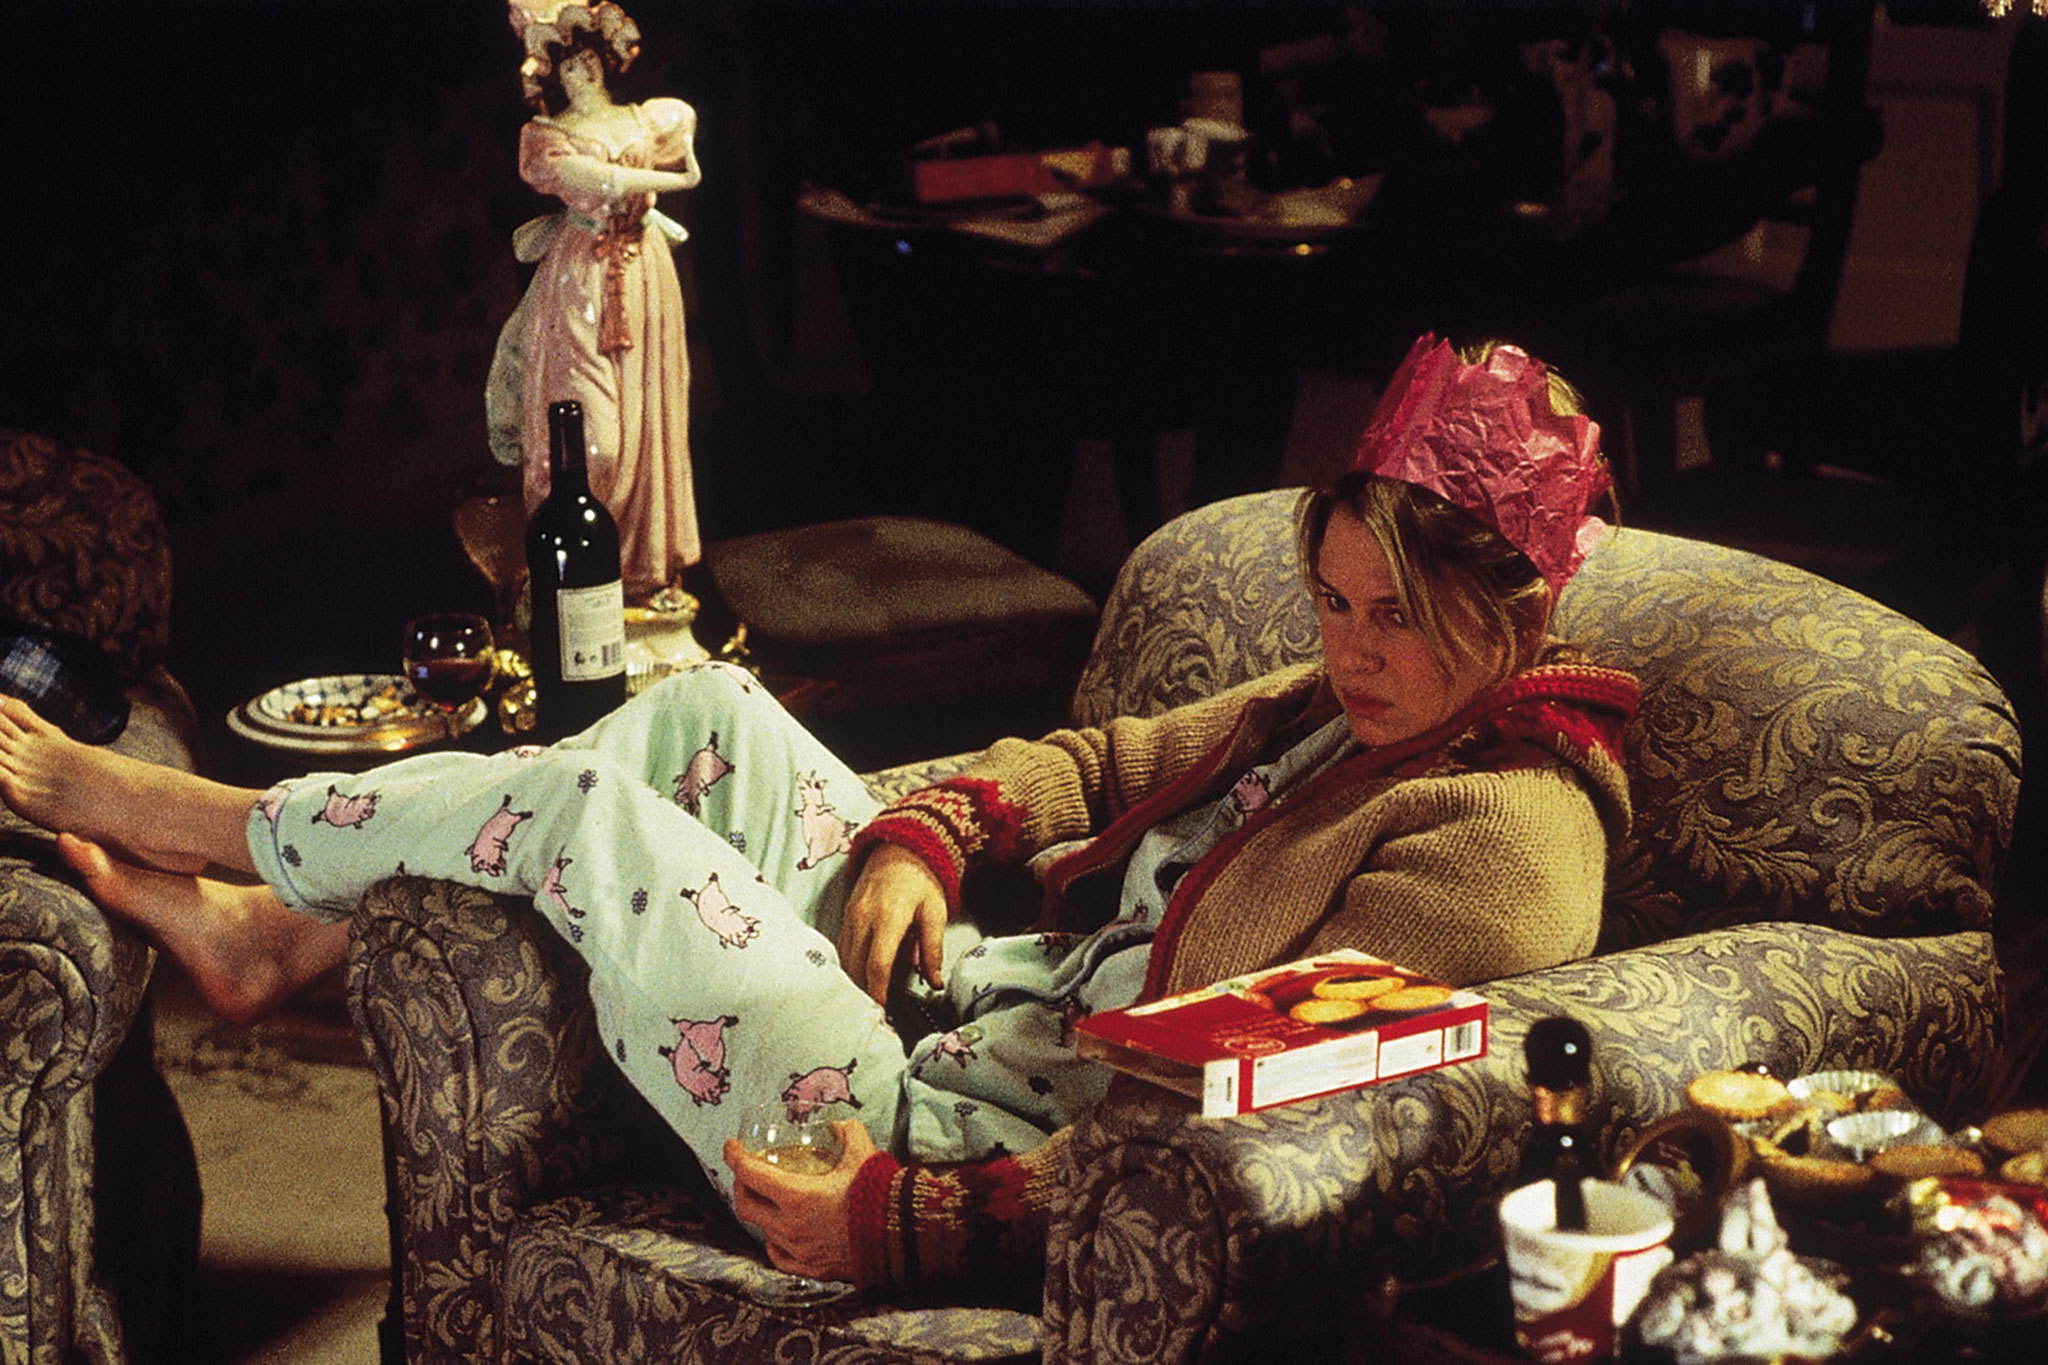 Bridget Jones S Diary 2001 Directed By Sharon Maguire Film Review